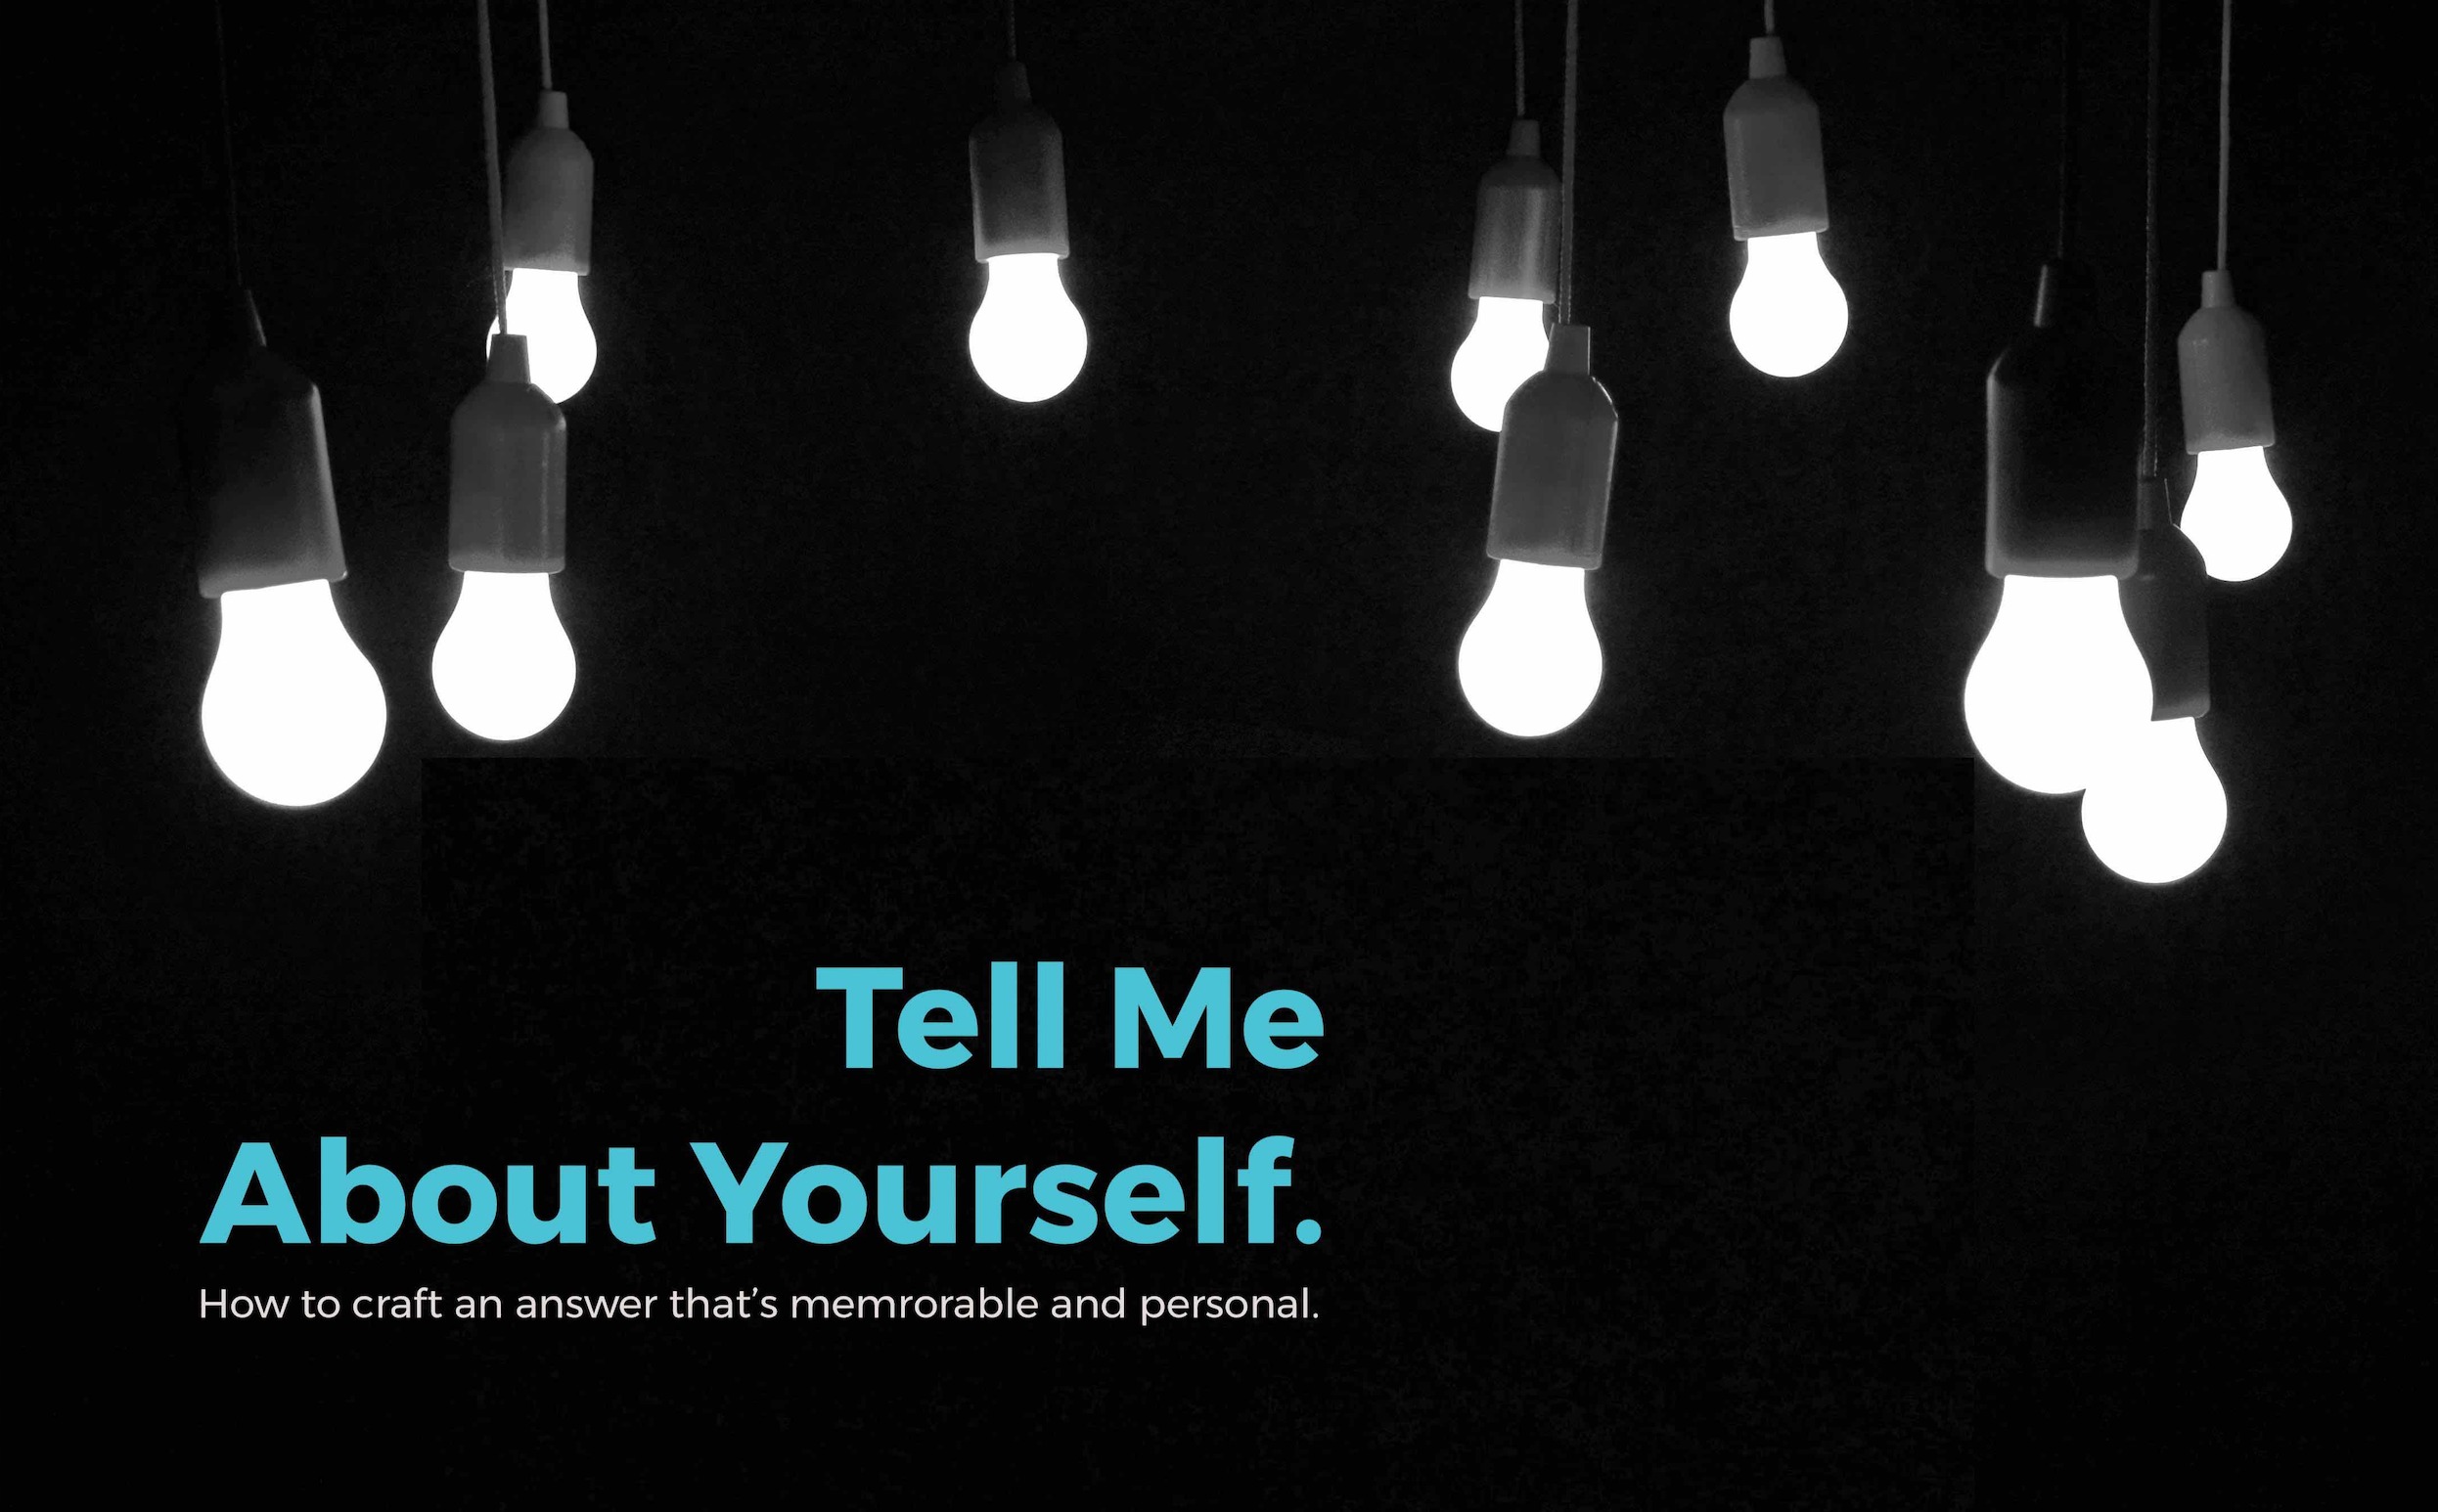 Title image with text "Tell me about yourself"